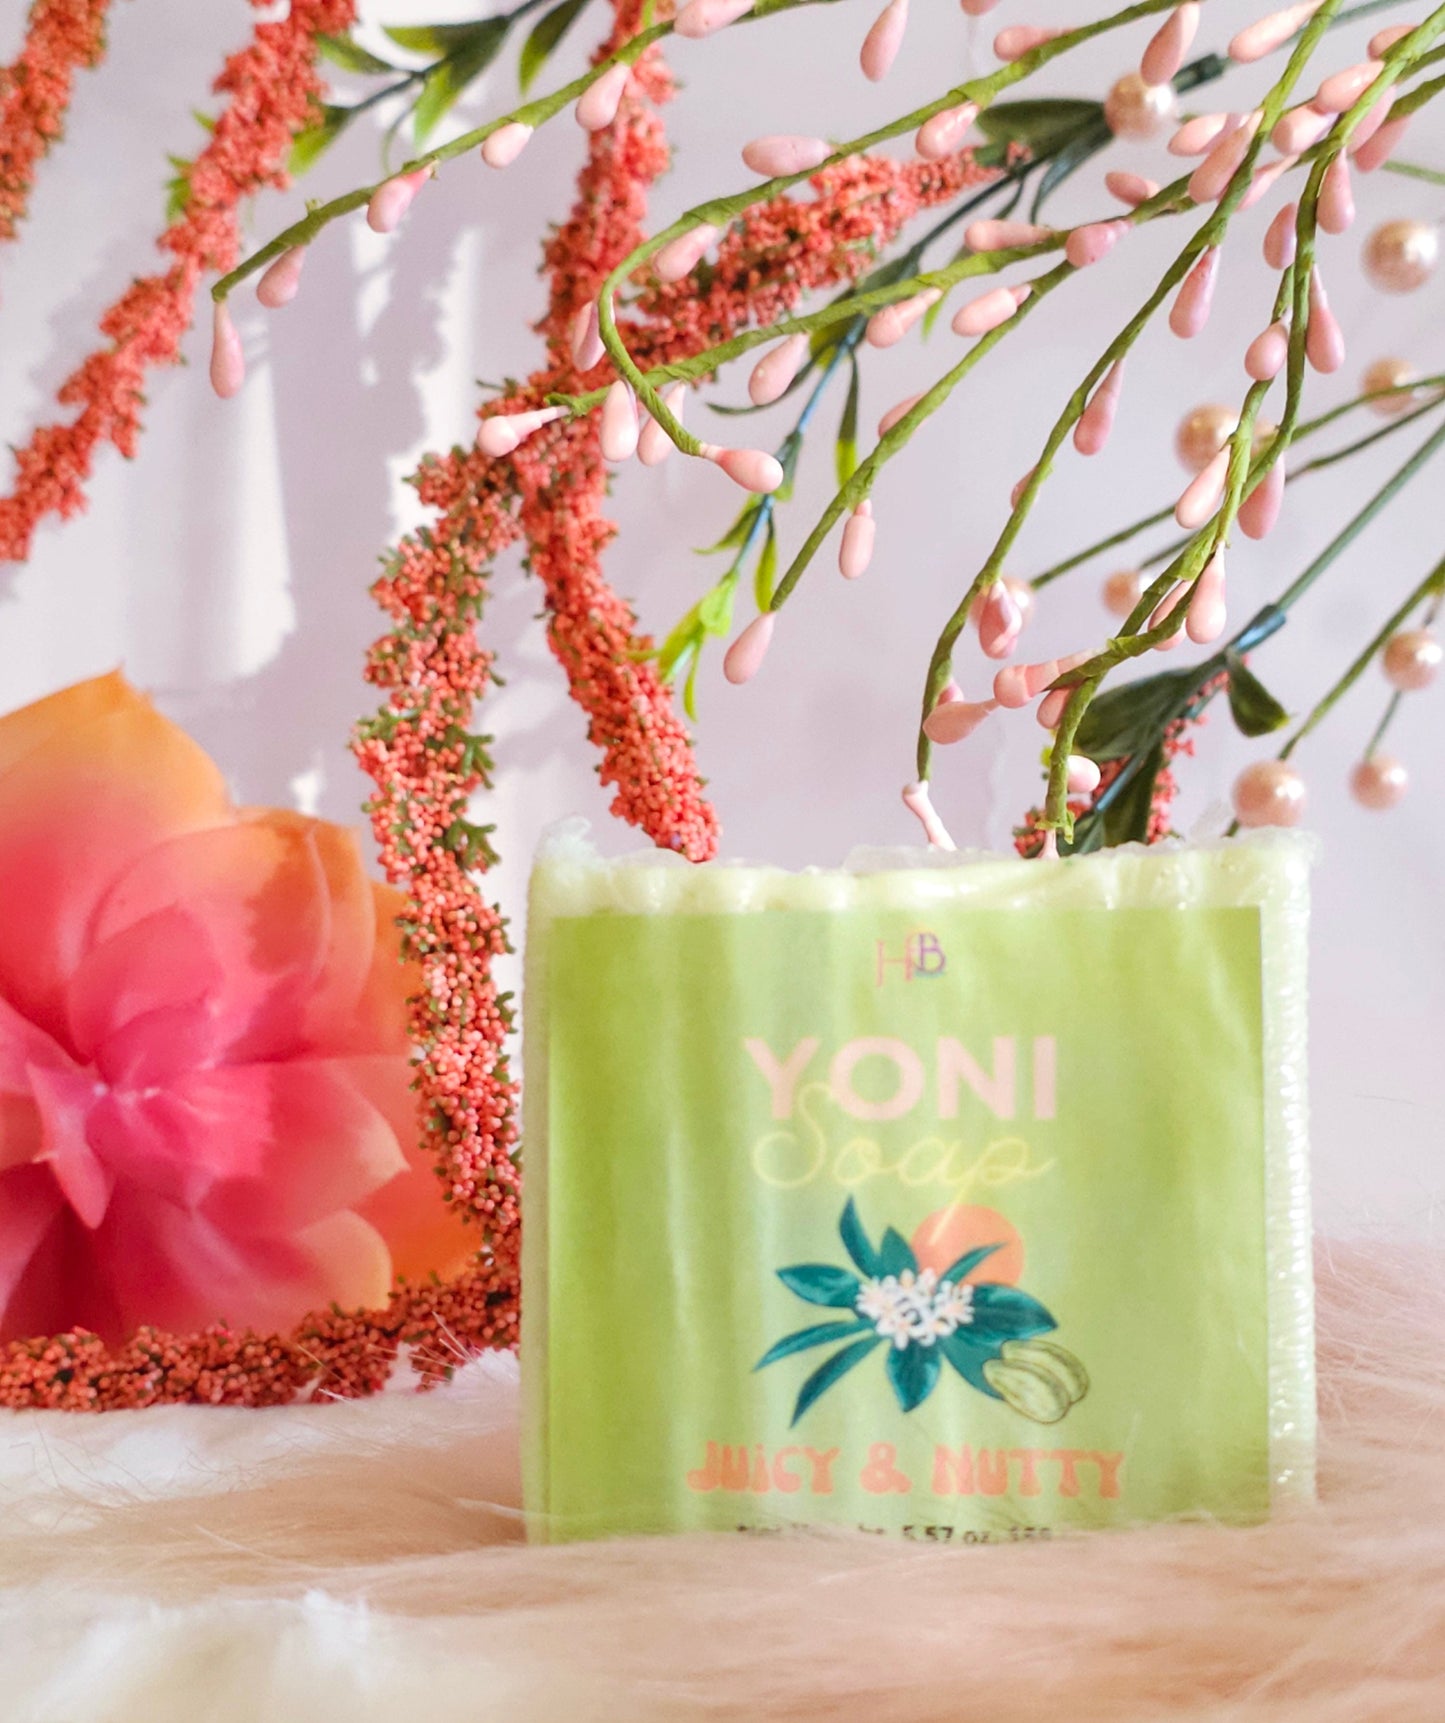 Juicy & Nutty Intimate Yoni Soap